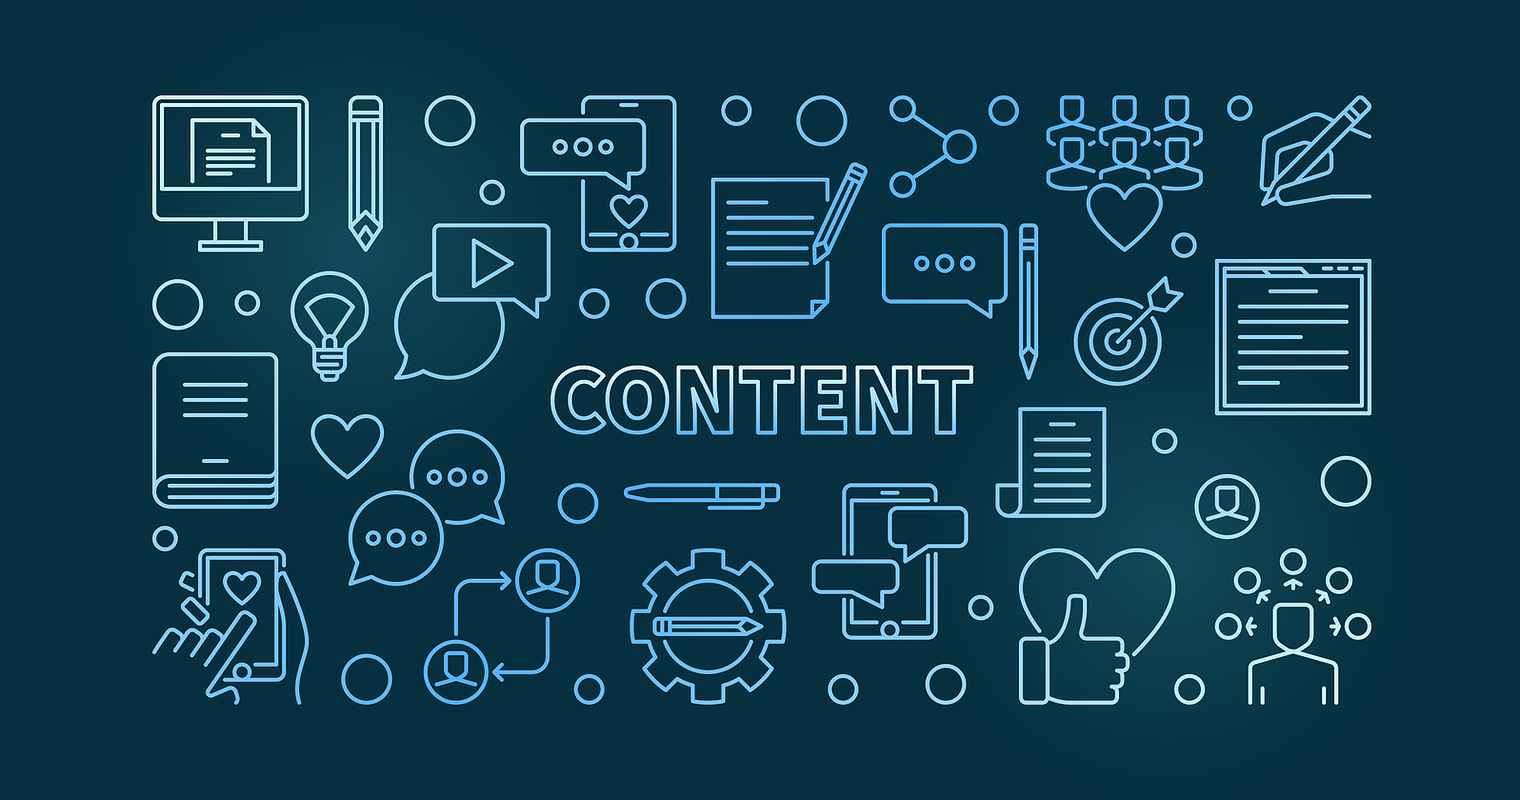 Context Marketing: 5 Foundational Elements to Consider When Mapping a Content Campaign